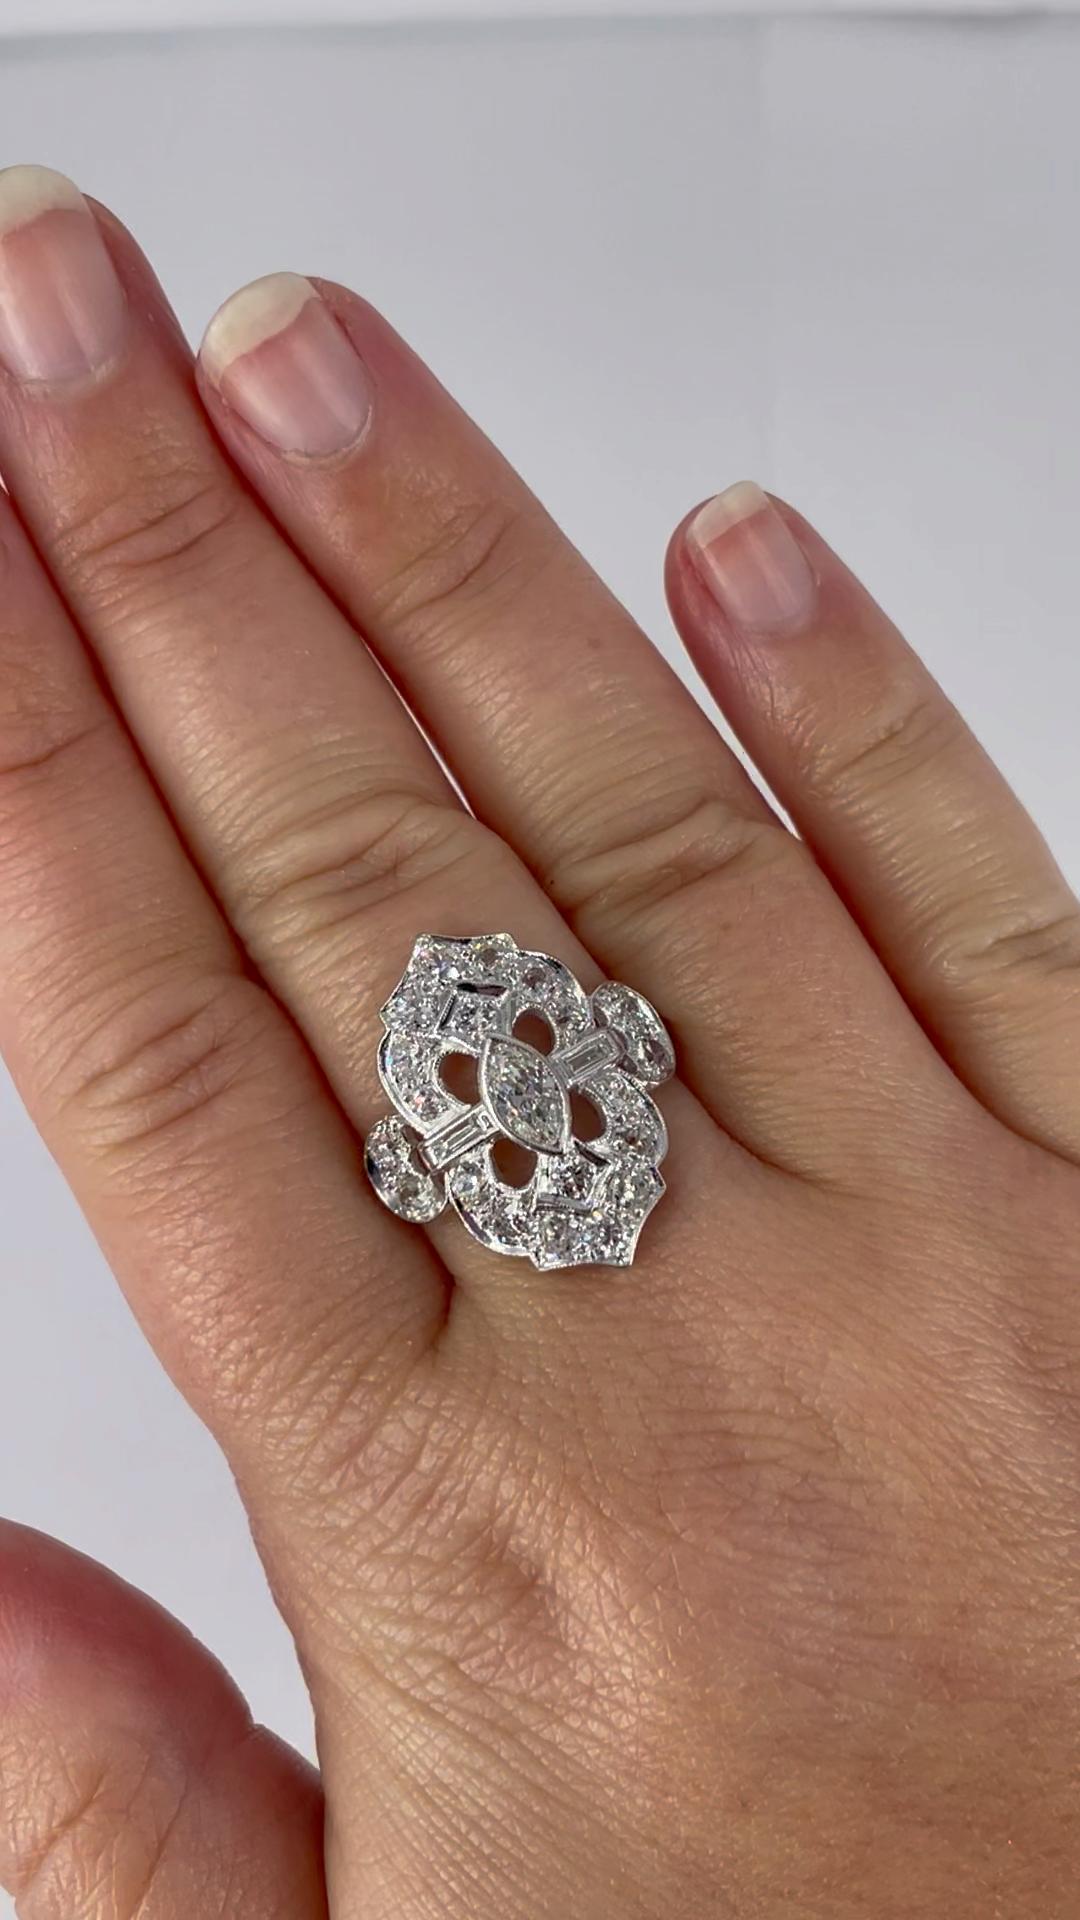 J. Birnbach Platinum Art Deco Diamond Ring with Marquise Center Diamond In Excellent Condition For Sale In New York, NY